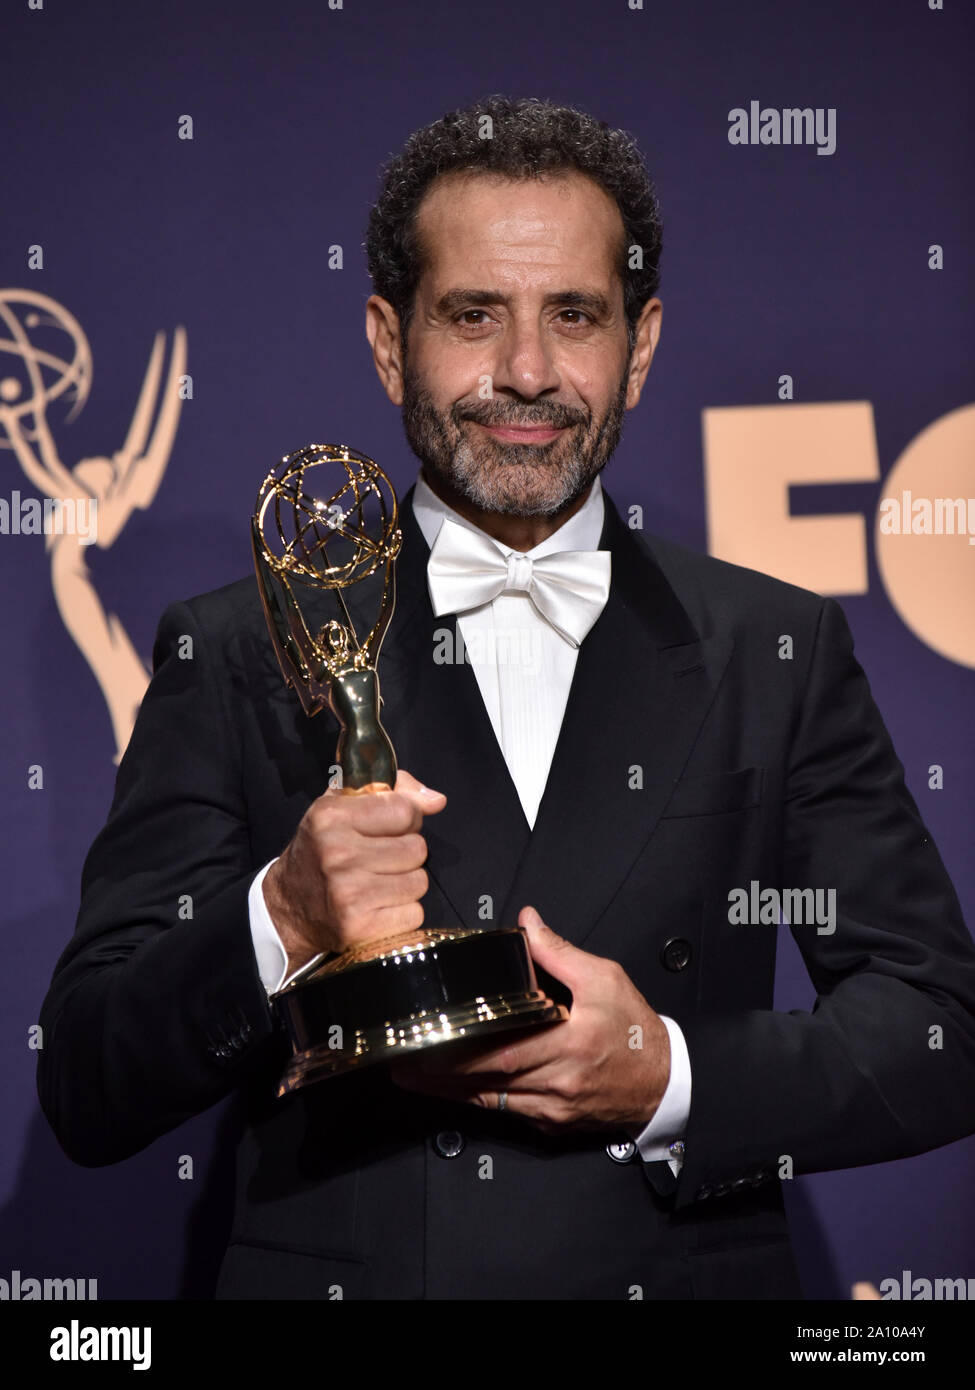 Tony Shalhoub, winner of the award for Outstanding Supporting Actor in a Comedy Series for 'The Marvelous Mrs. Maisel' appears backstage during the 71st annual Primetime Emmy Awards held at the Microsoft Theater in downtown Los Angeles on Sunday, September 22, 2019. Photo by Christine Chew/UPI Stock Photo